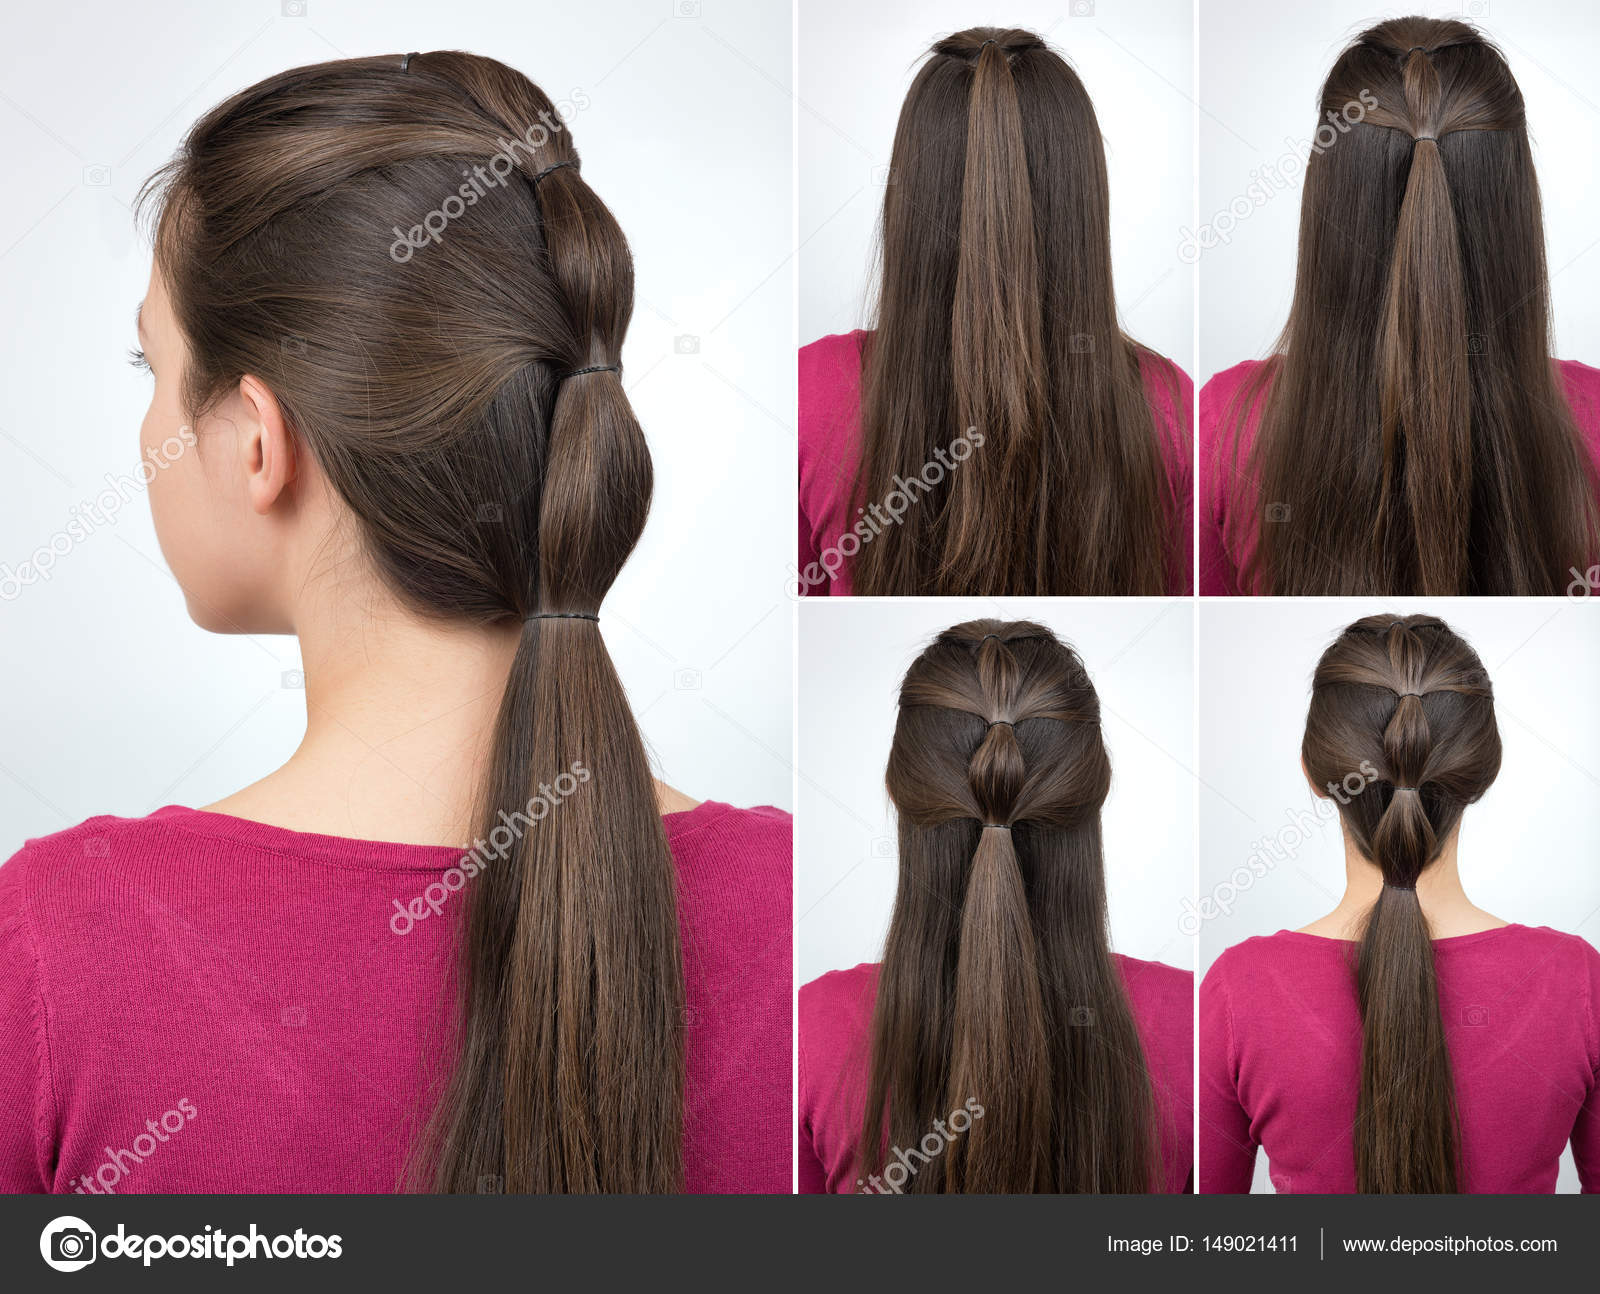 How to Get the Perfect Ponytail | Hairstyle Tips - Cute Girls Hairstyles